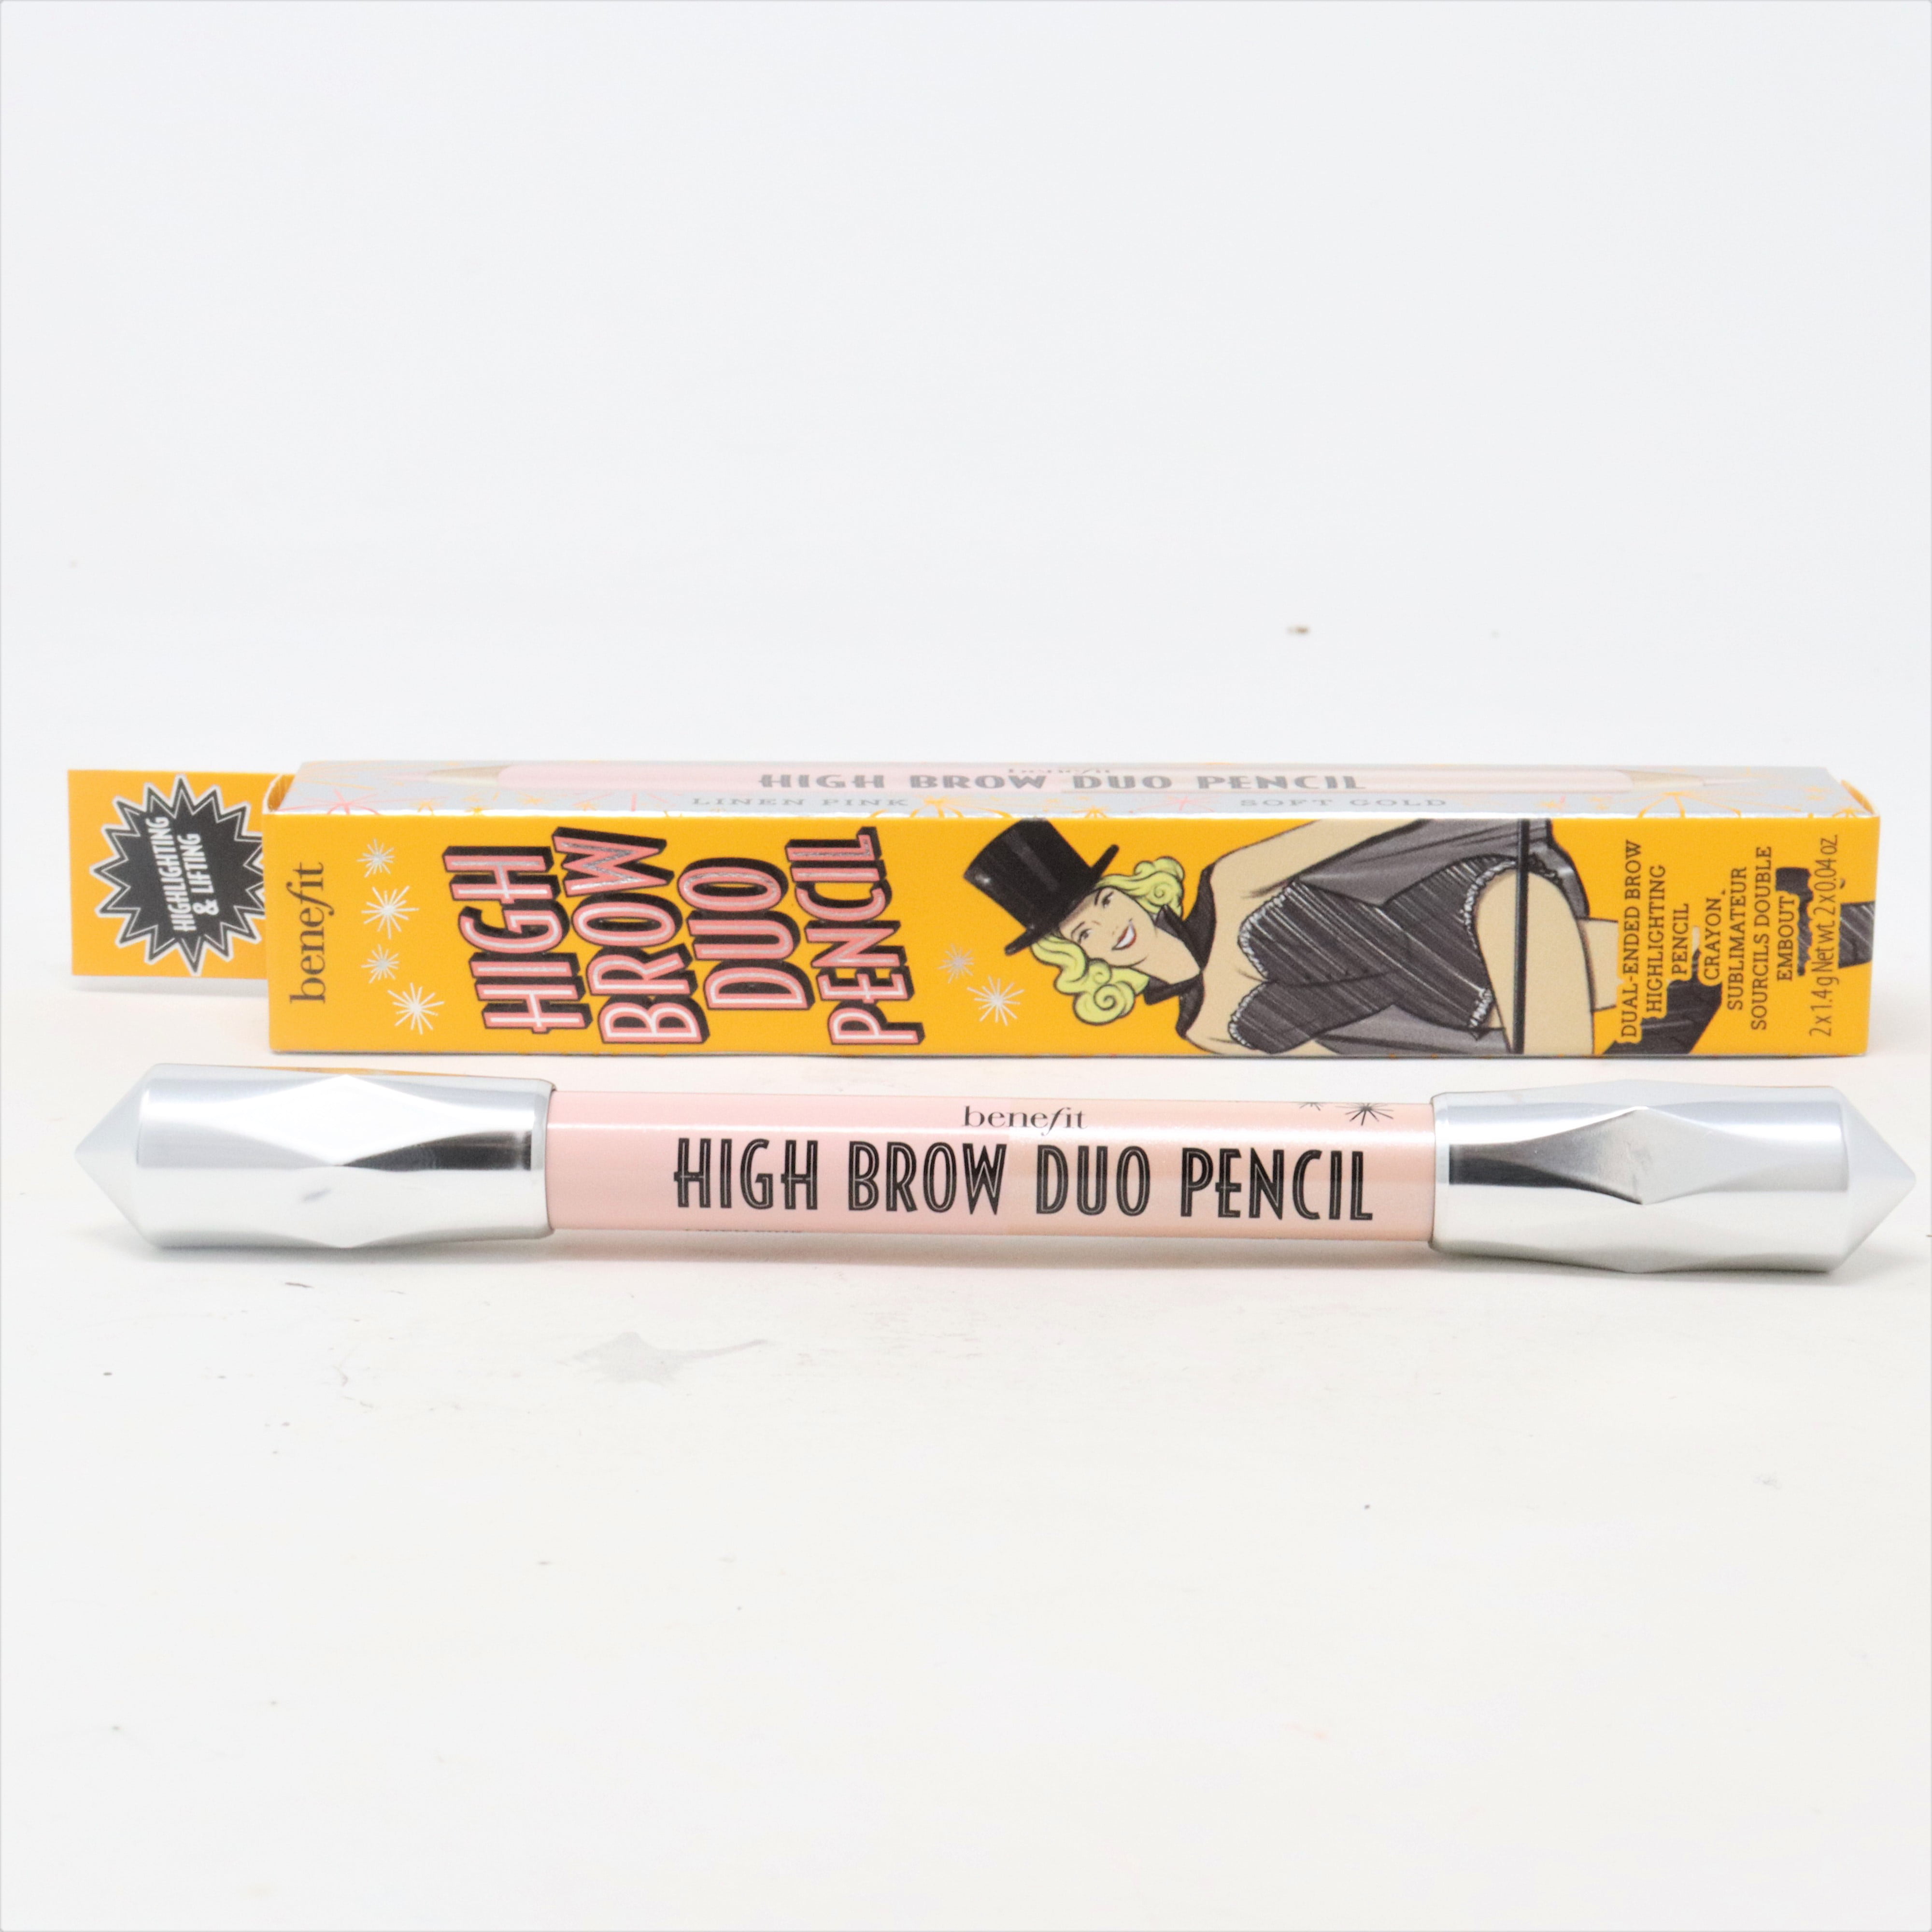 Benefit High Brow Duo Pencil Light New With Box 